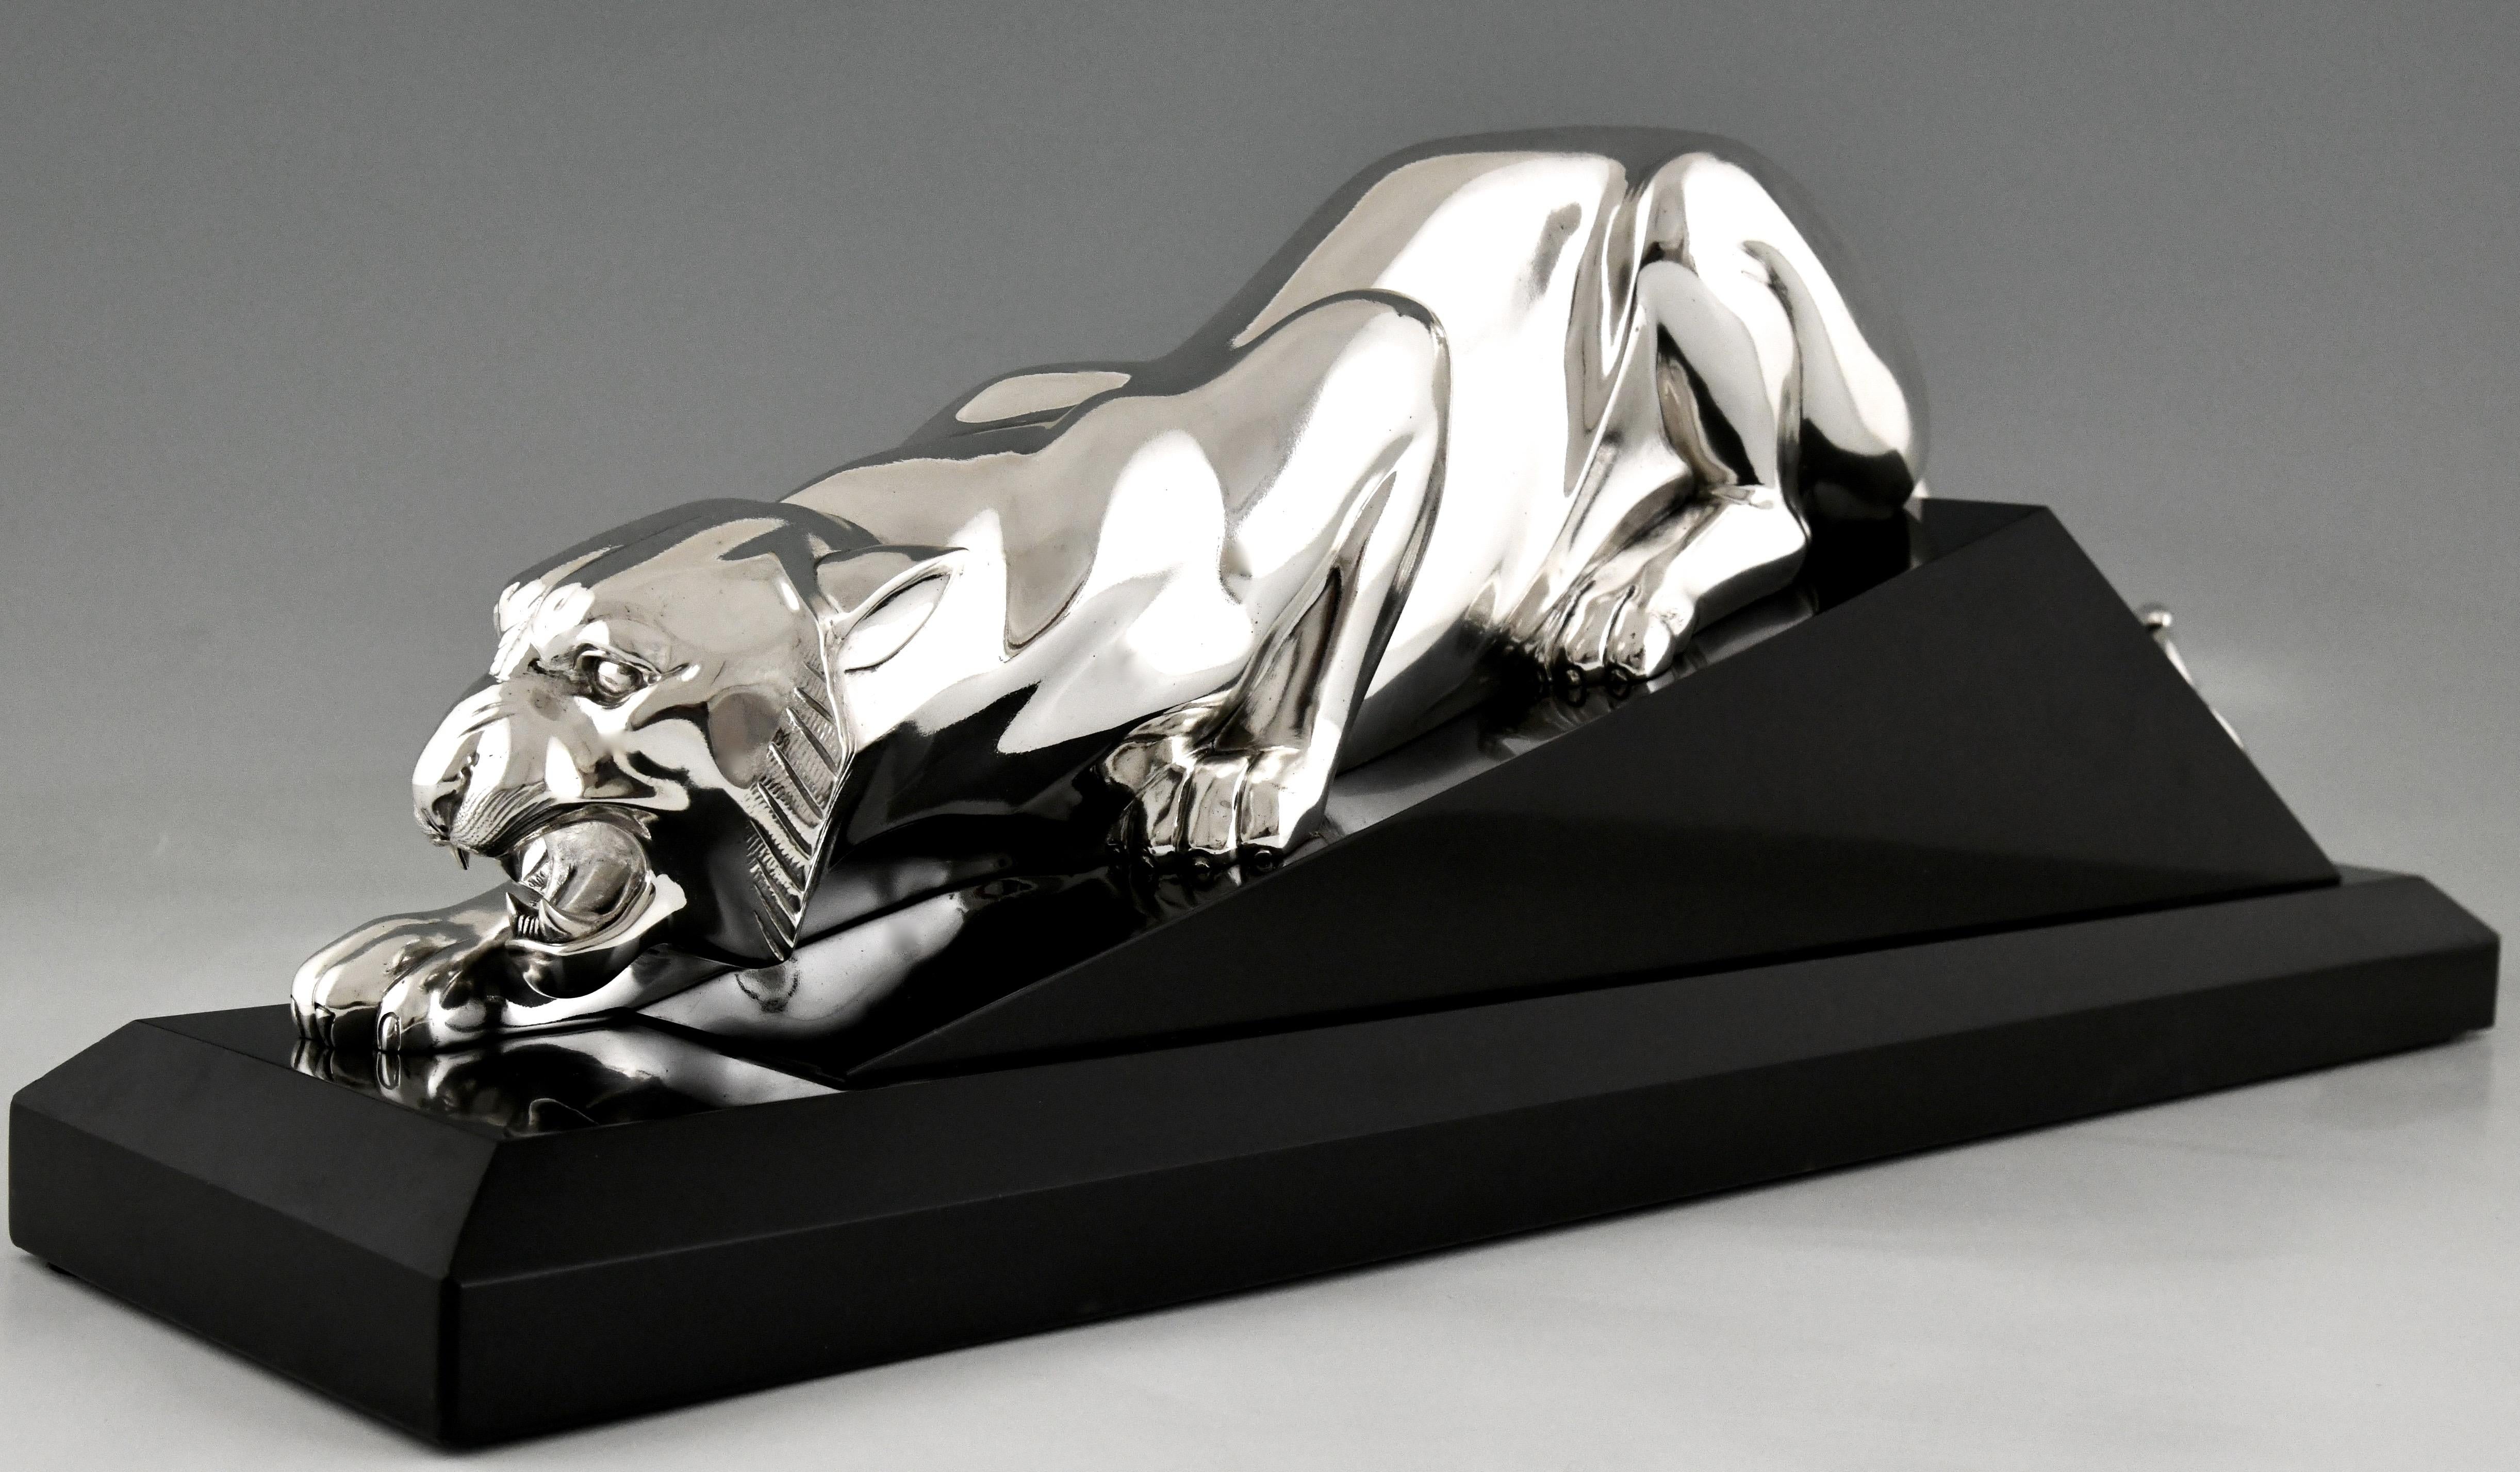 French Art Deco Silvered Bronze Sculpture of a Panther by Georges Lavroff 1925